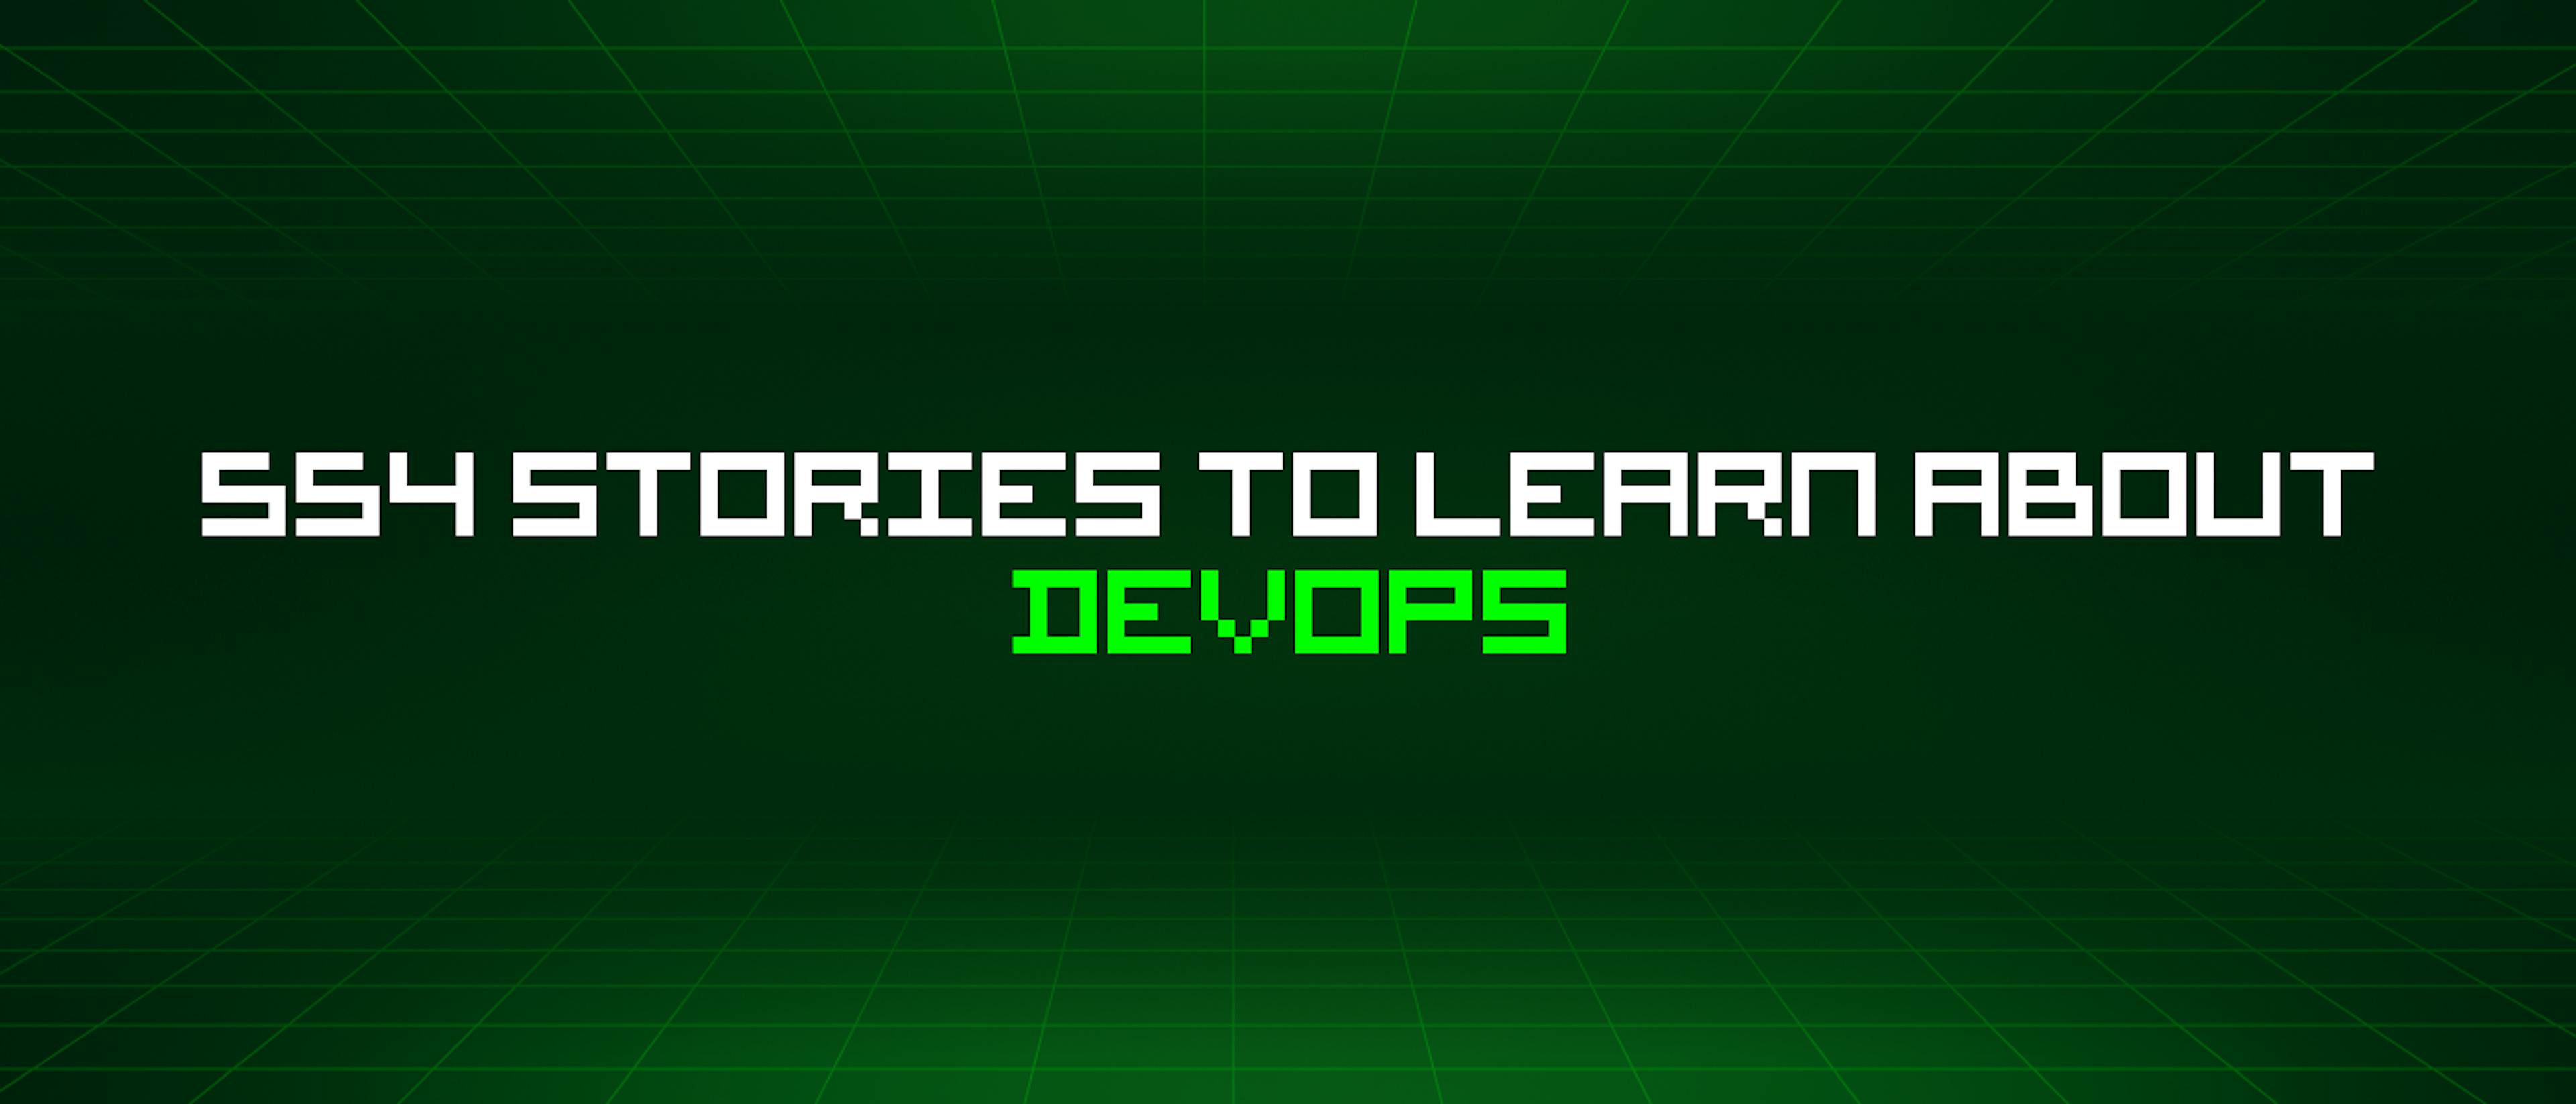 featured image - 554 Stories To Learn About Devops